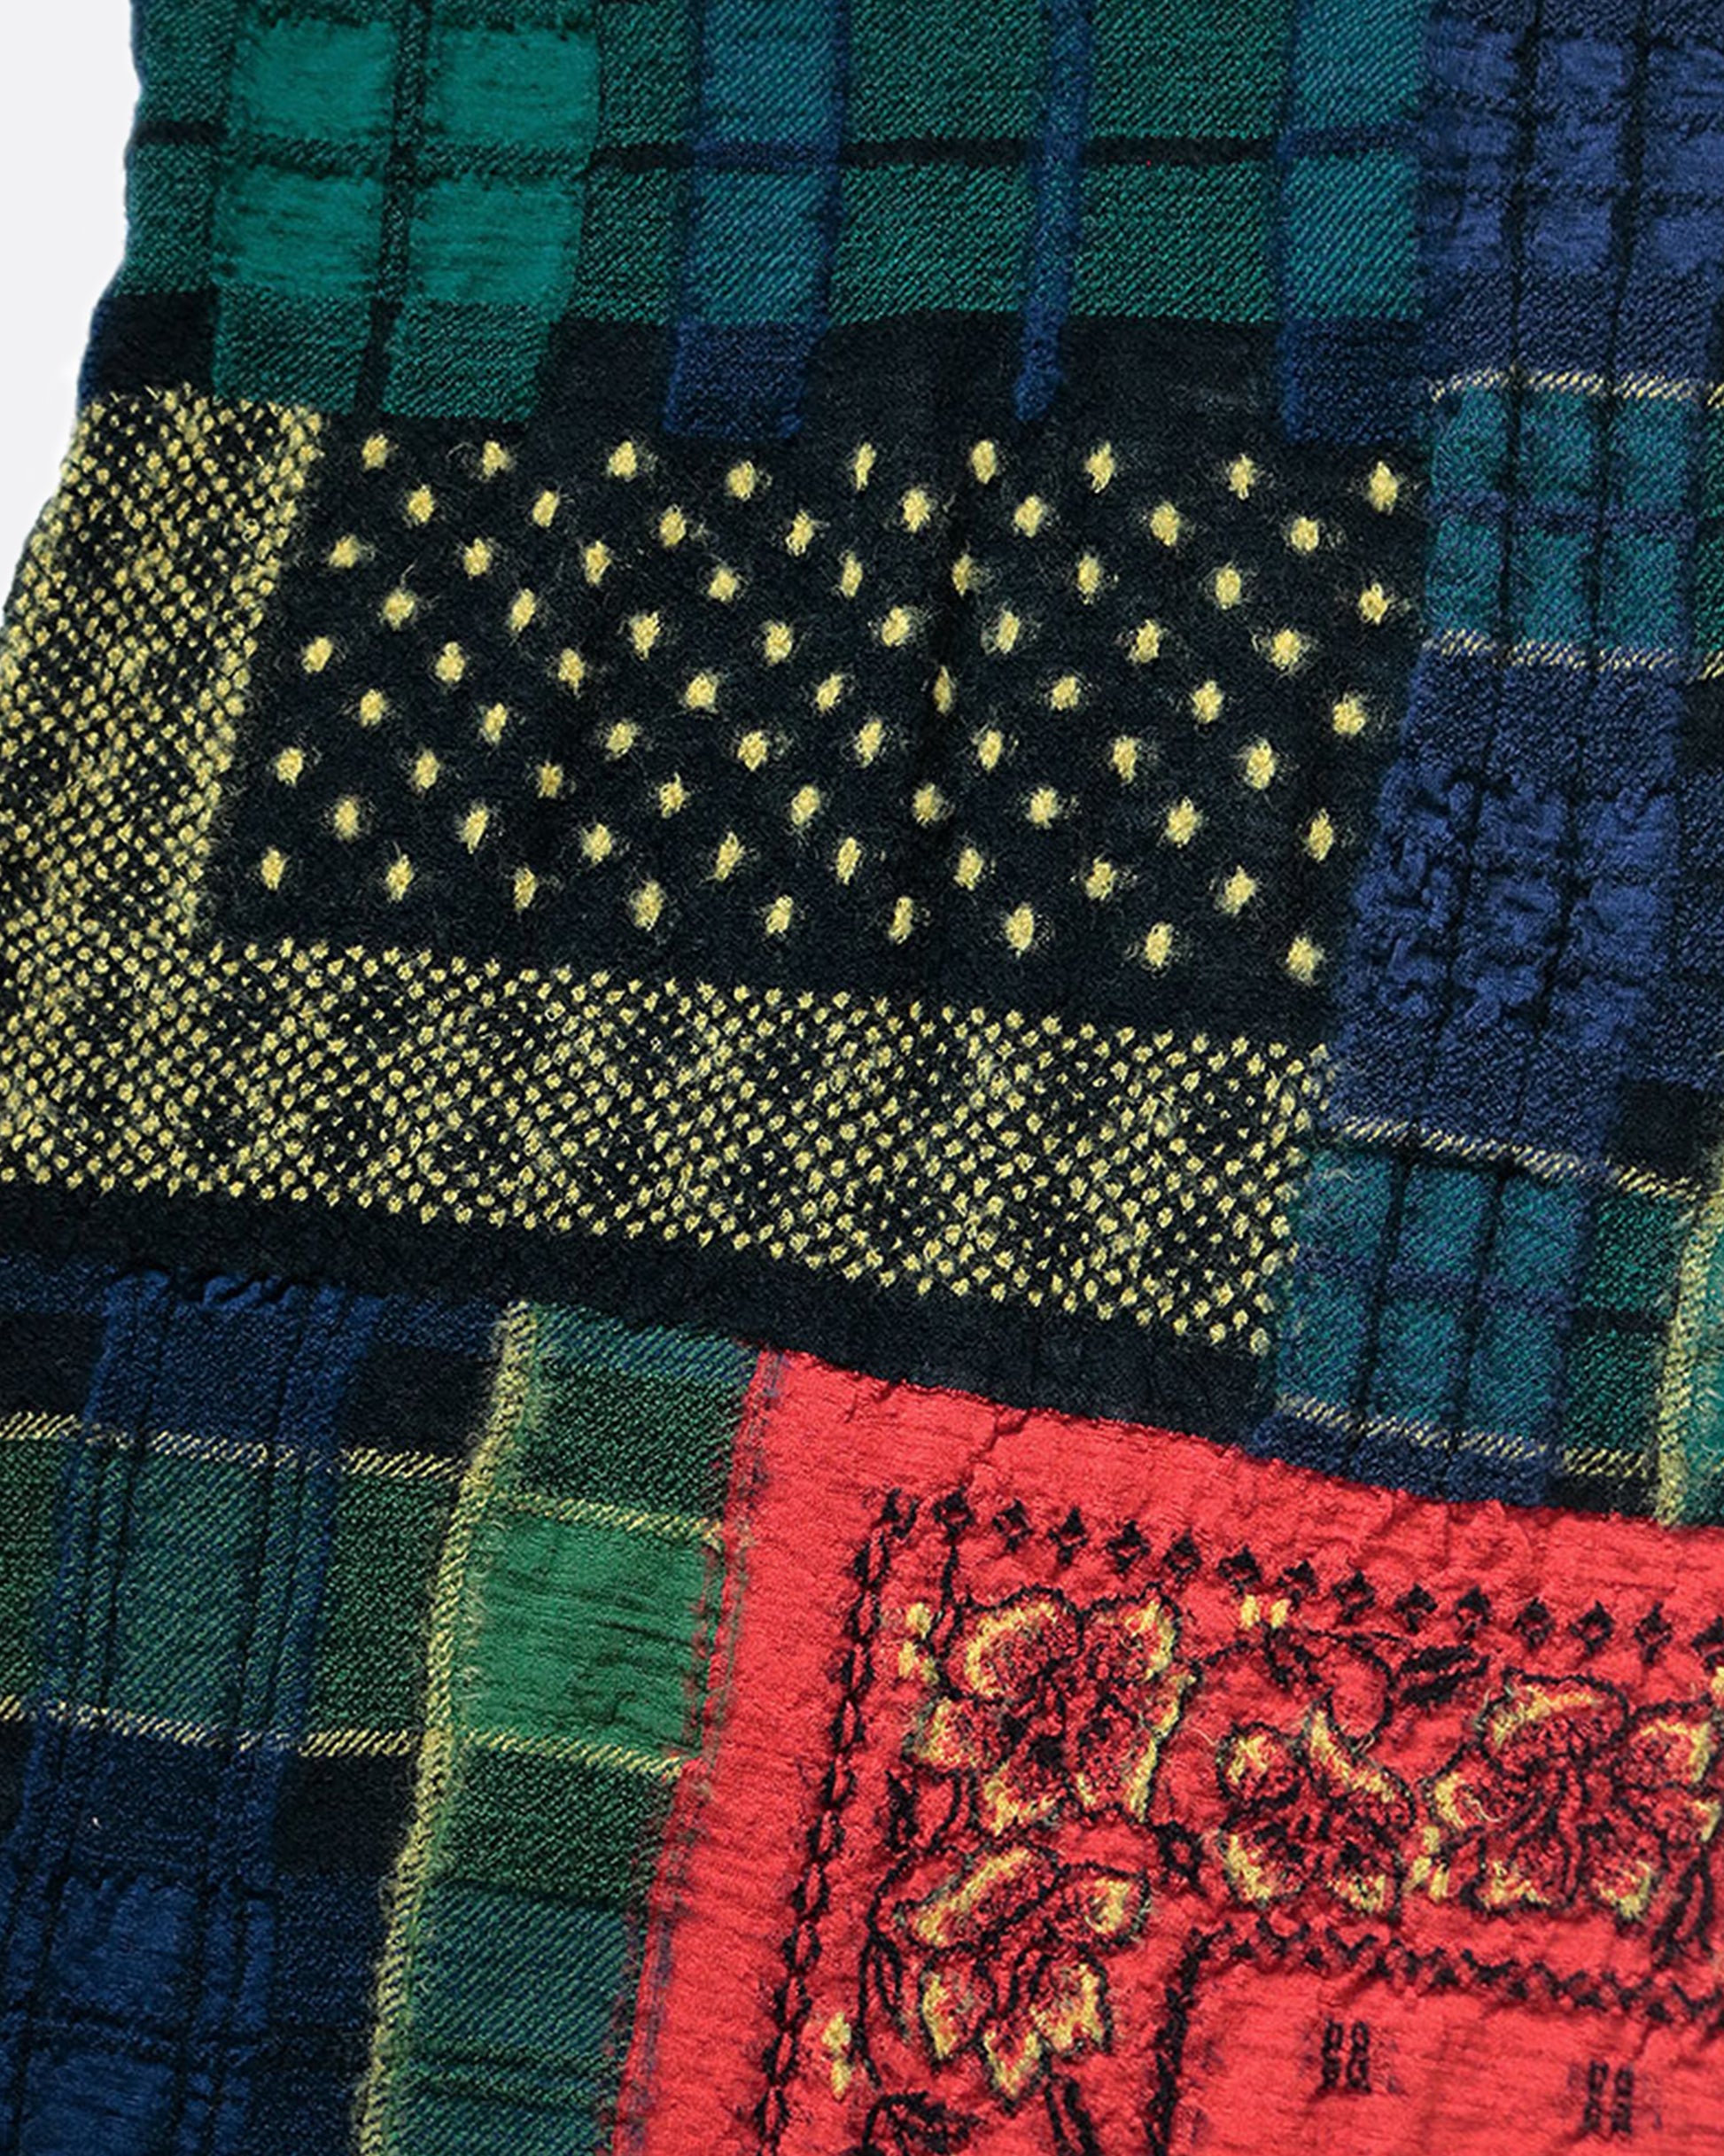 A fluffy wool patchwork scarf that combines different tartan checks and bandana patterns.